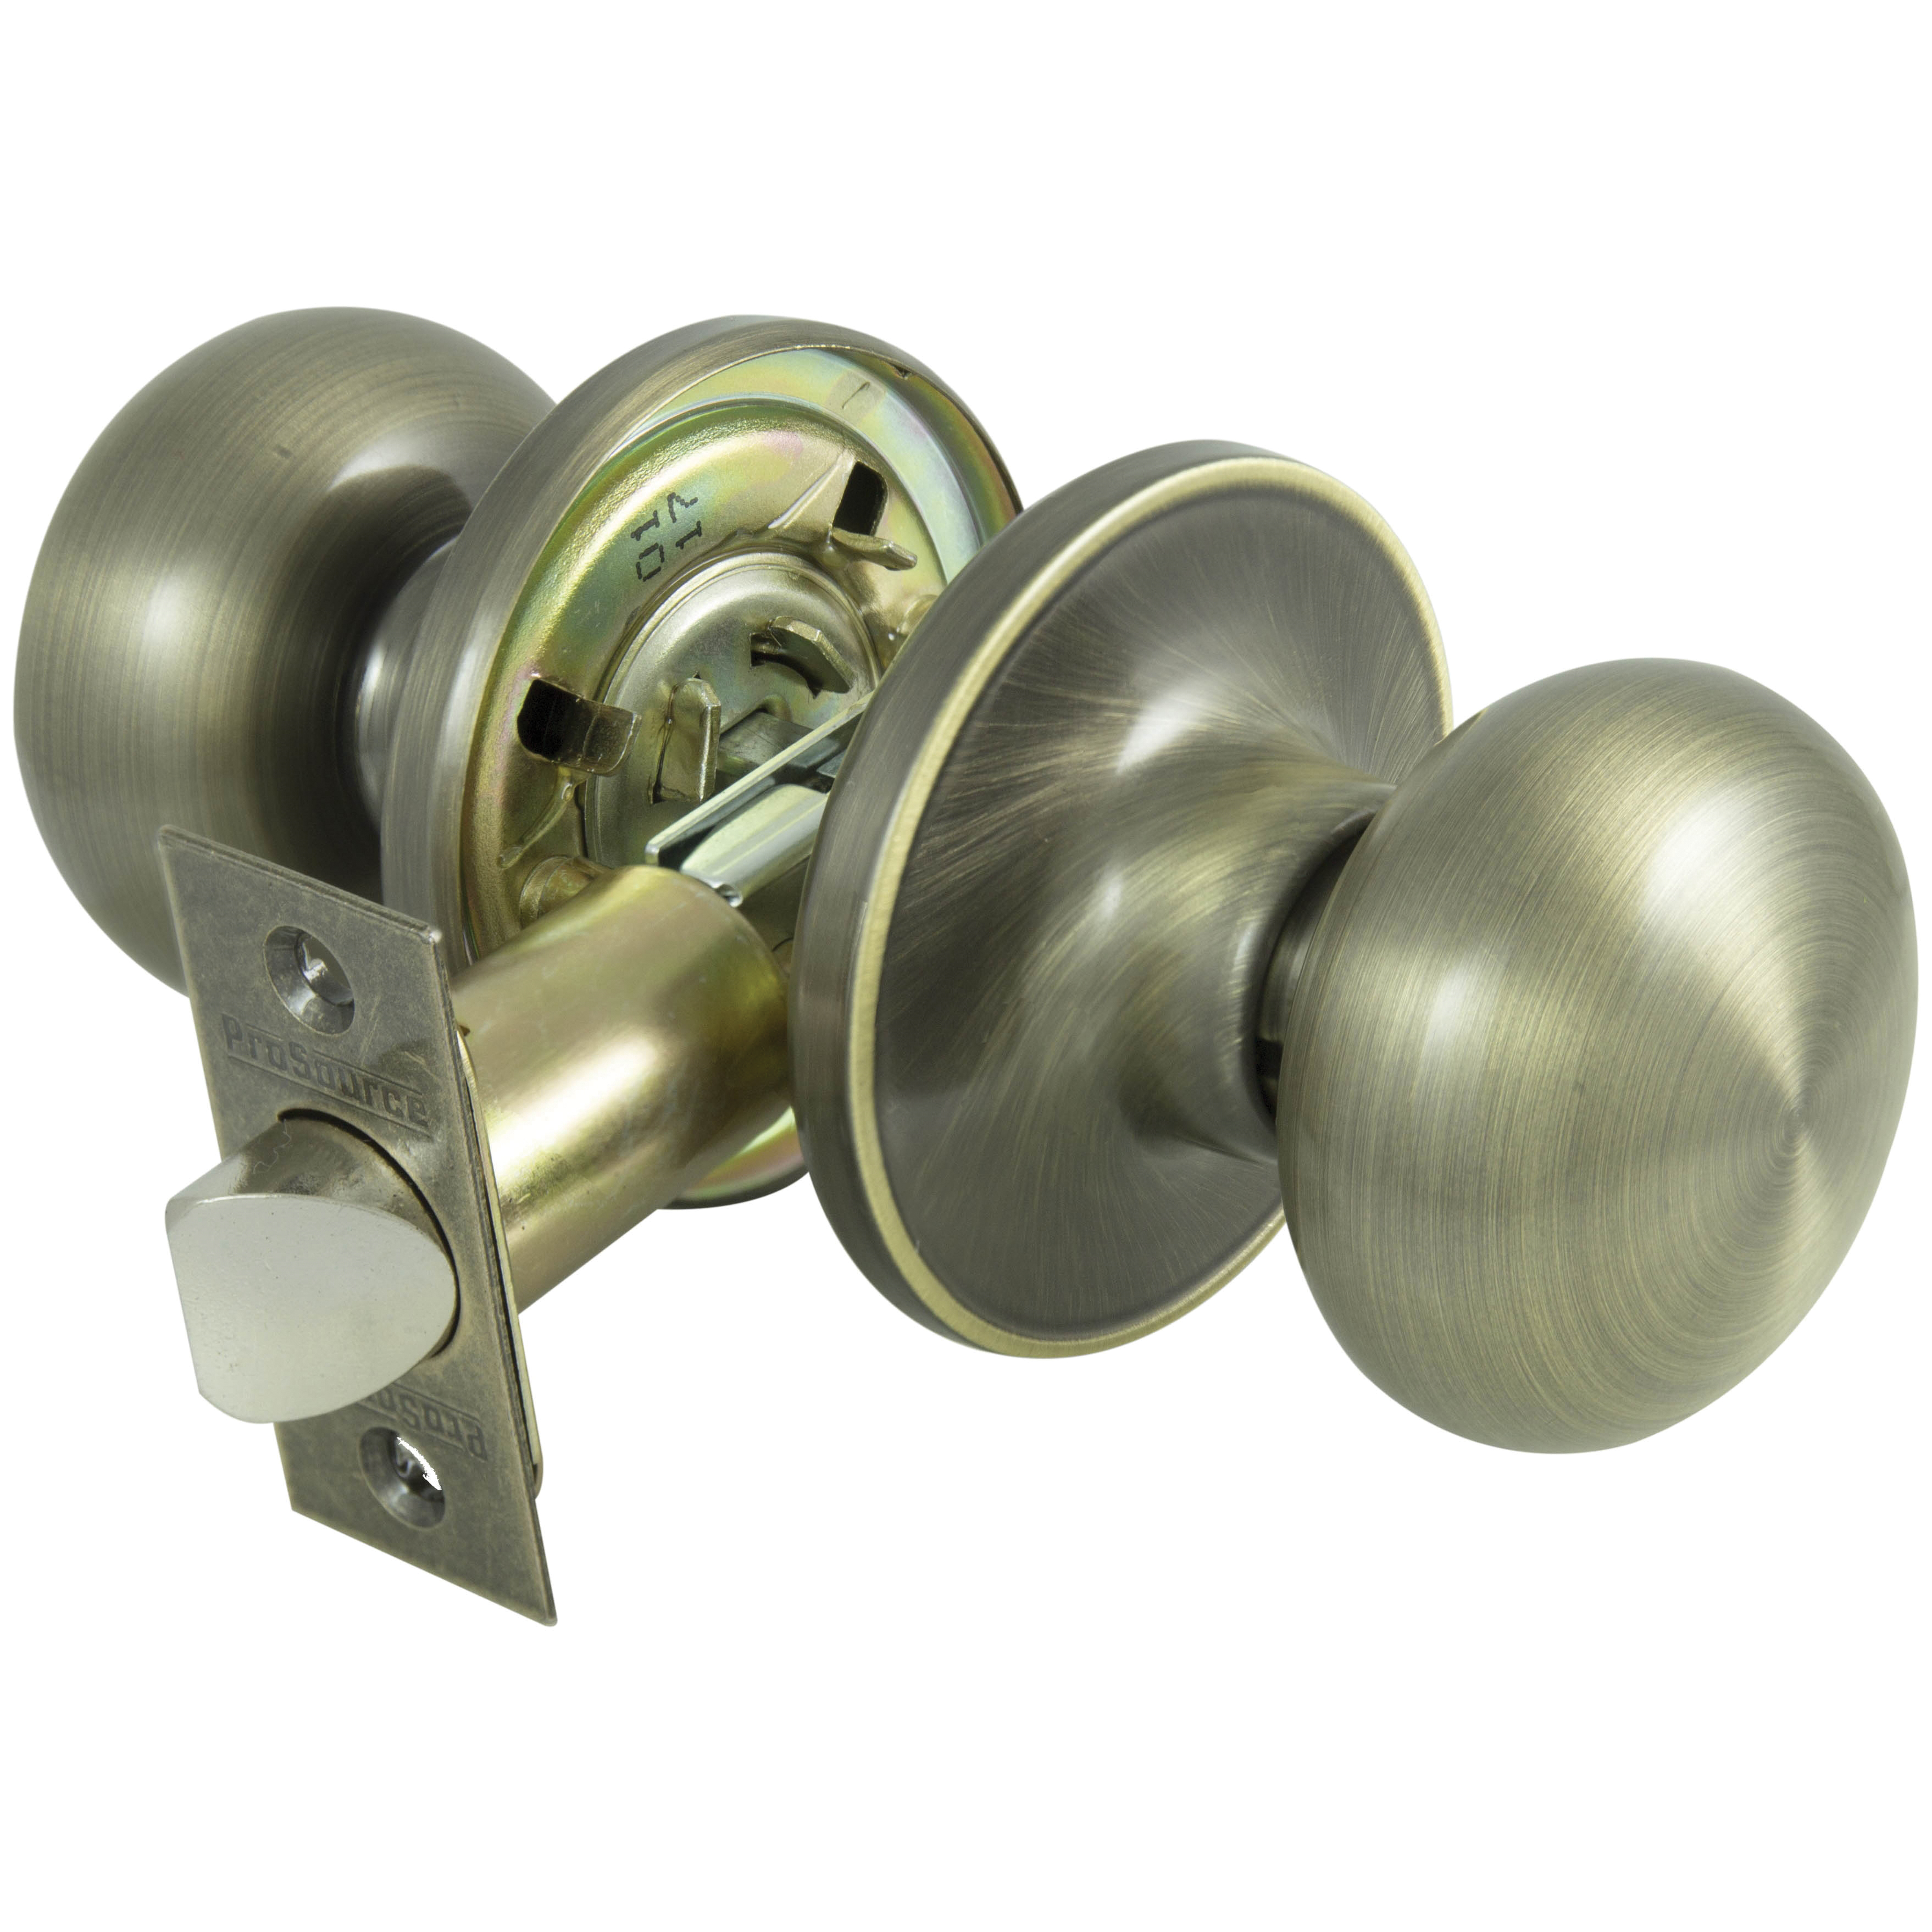 TF830V-PS Passage Knob, Metal, Antique Brass, 2-3/8 to 2-3/4 in Backset, 1-3/8 to 1-3/4 in Thick Door